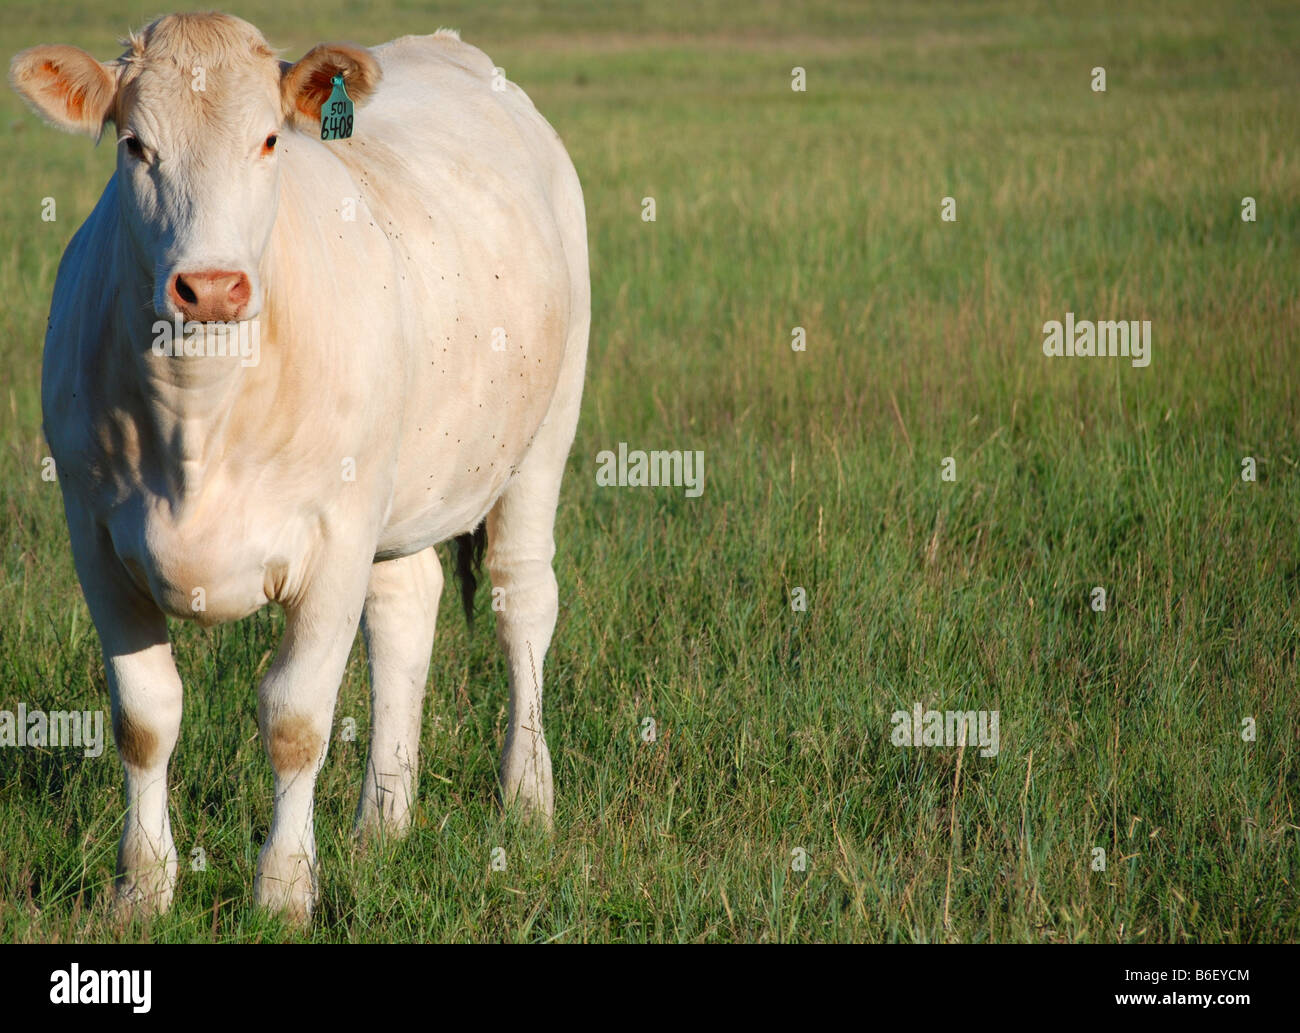 Charolais cow standing in a pasture Stock Photo